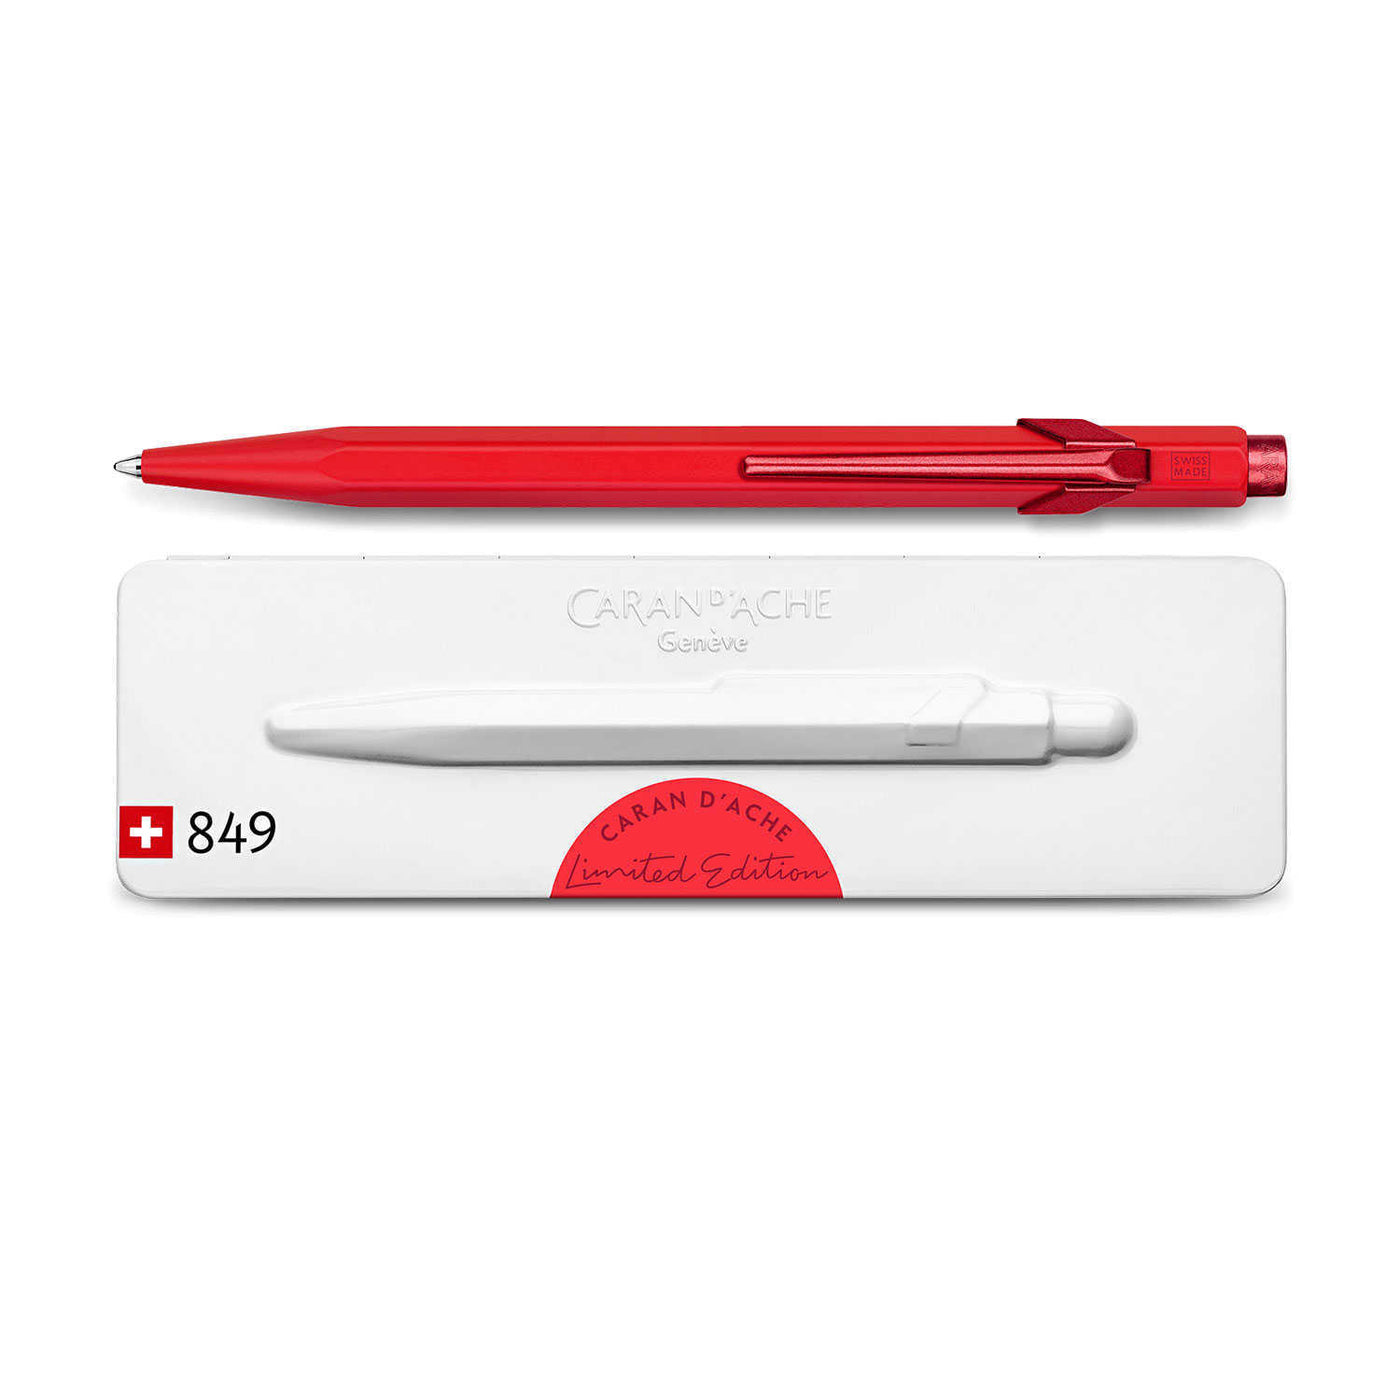 Caran d'Ache 849 Claim Your Style Ball Pen - Scarlet Red (Limited Edition) 2